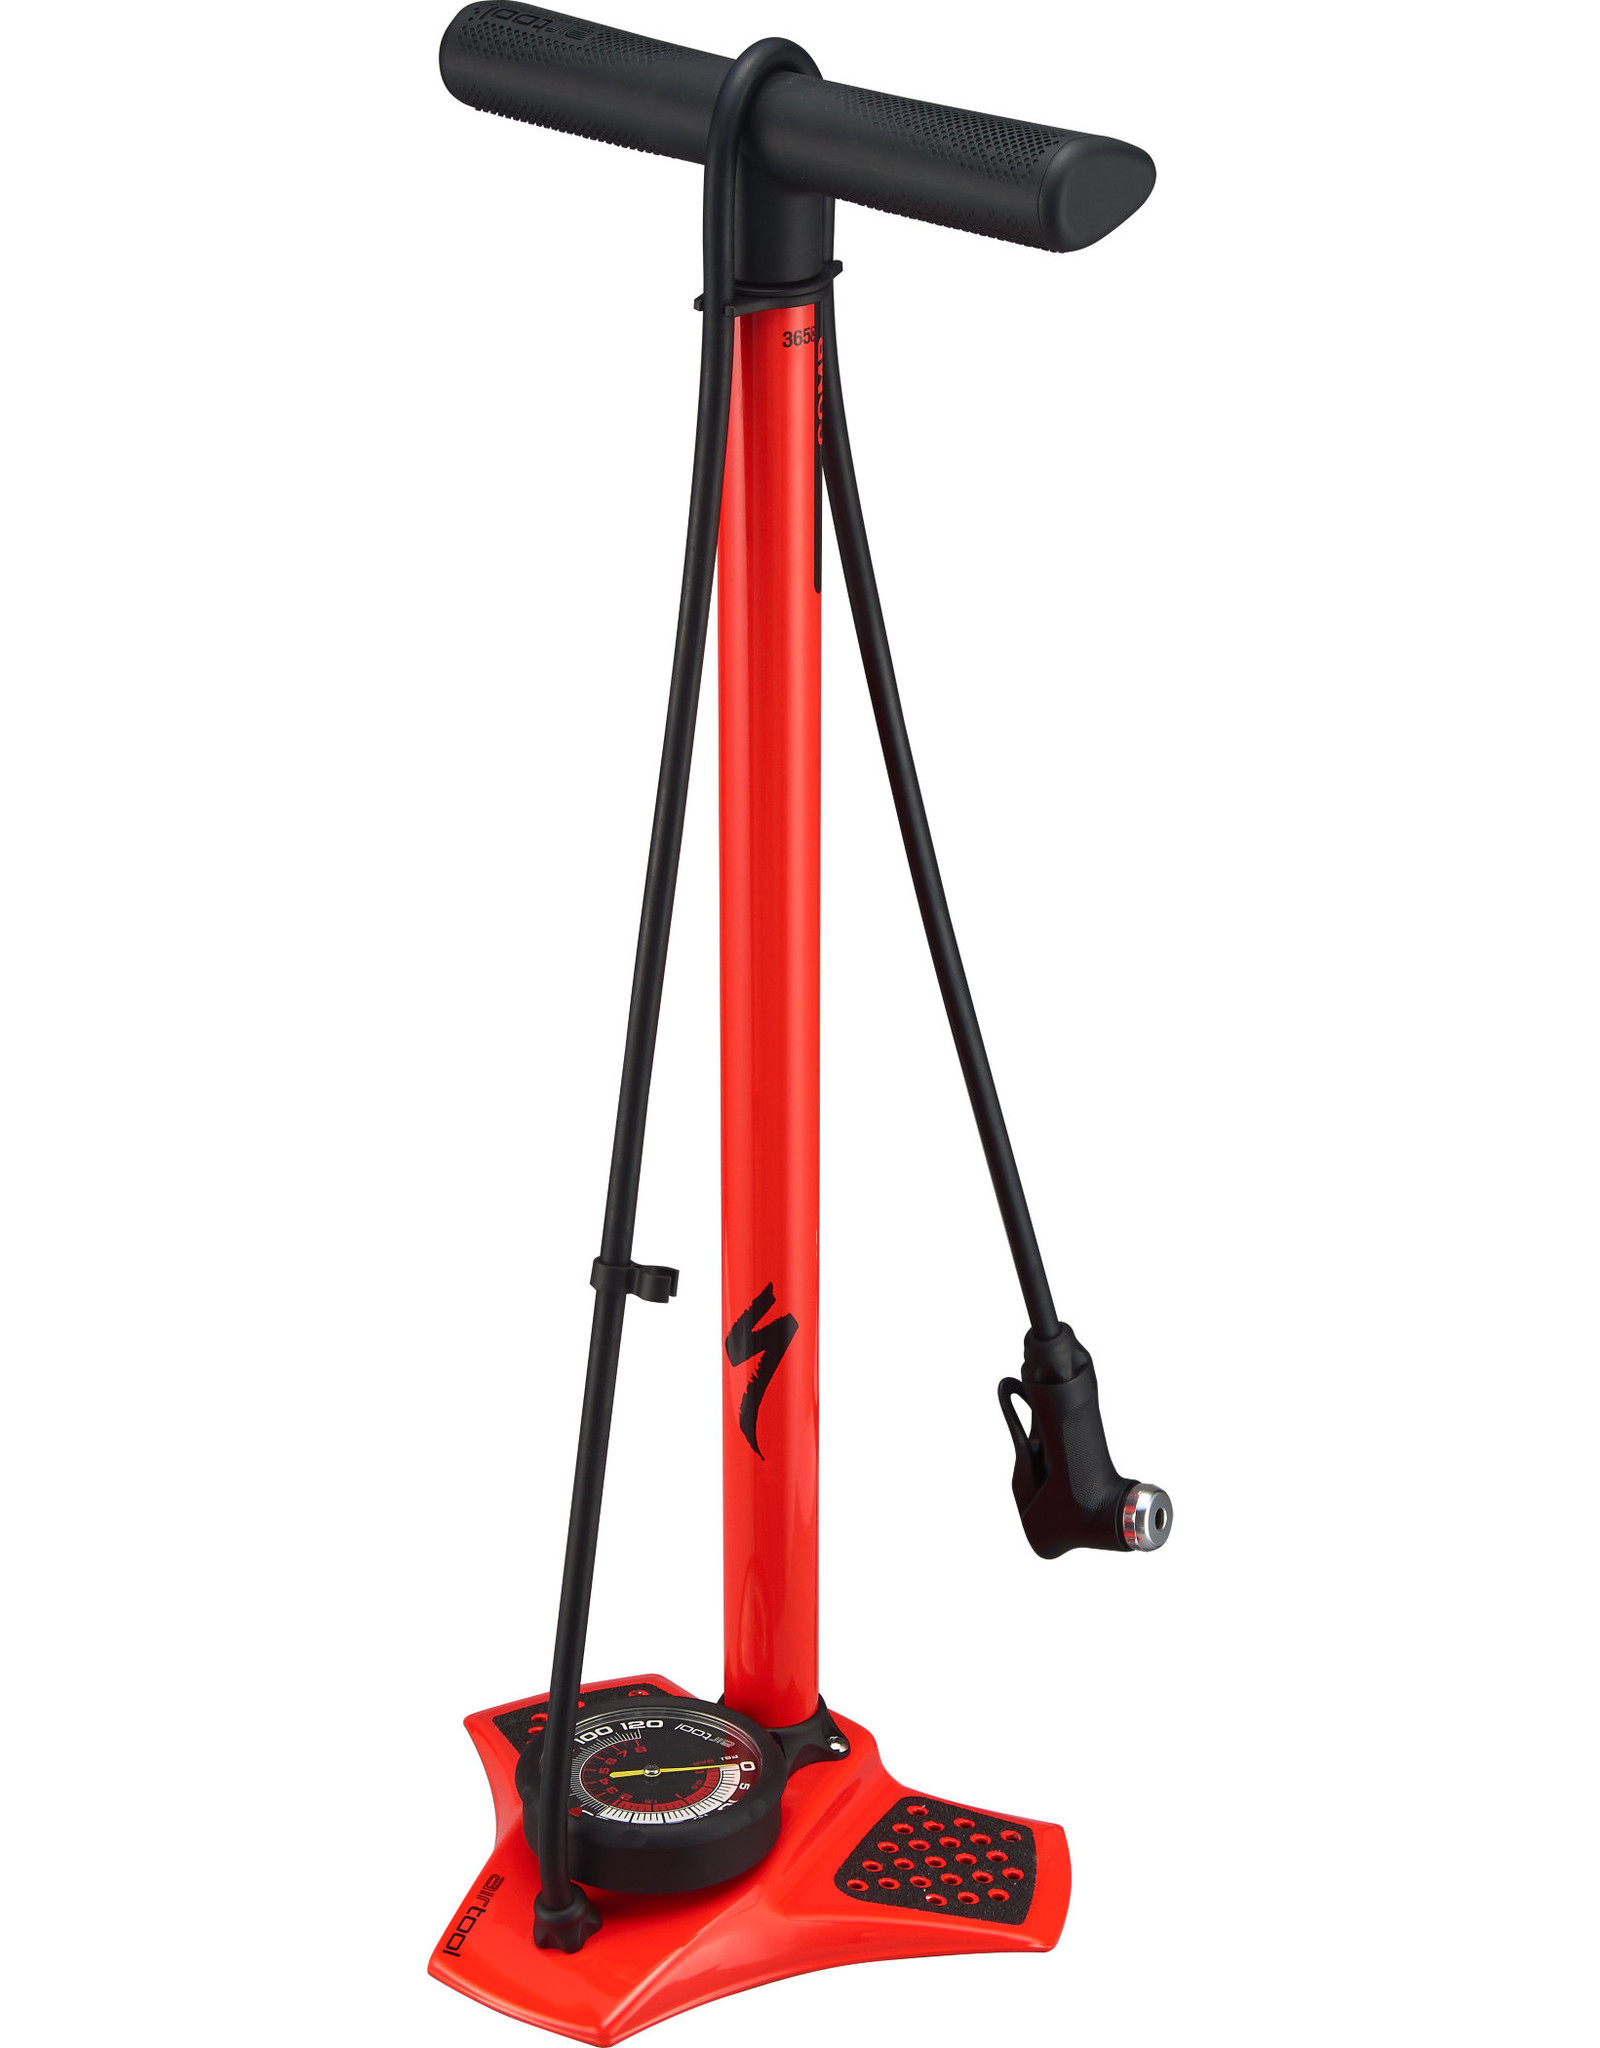 Specialized AIR TOOL COMP FLR PUMP RKTRED One Size